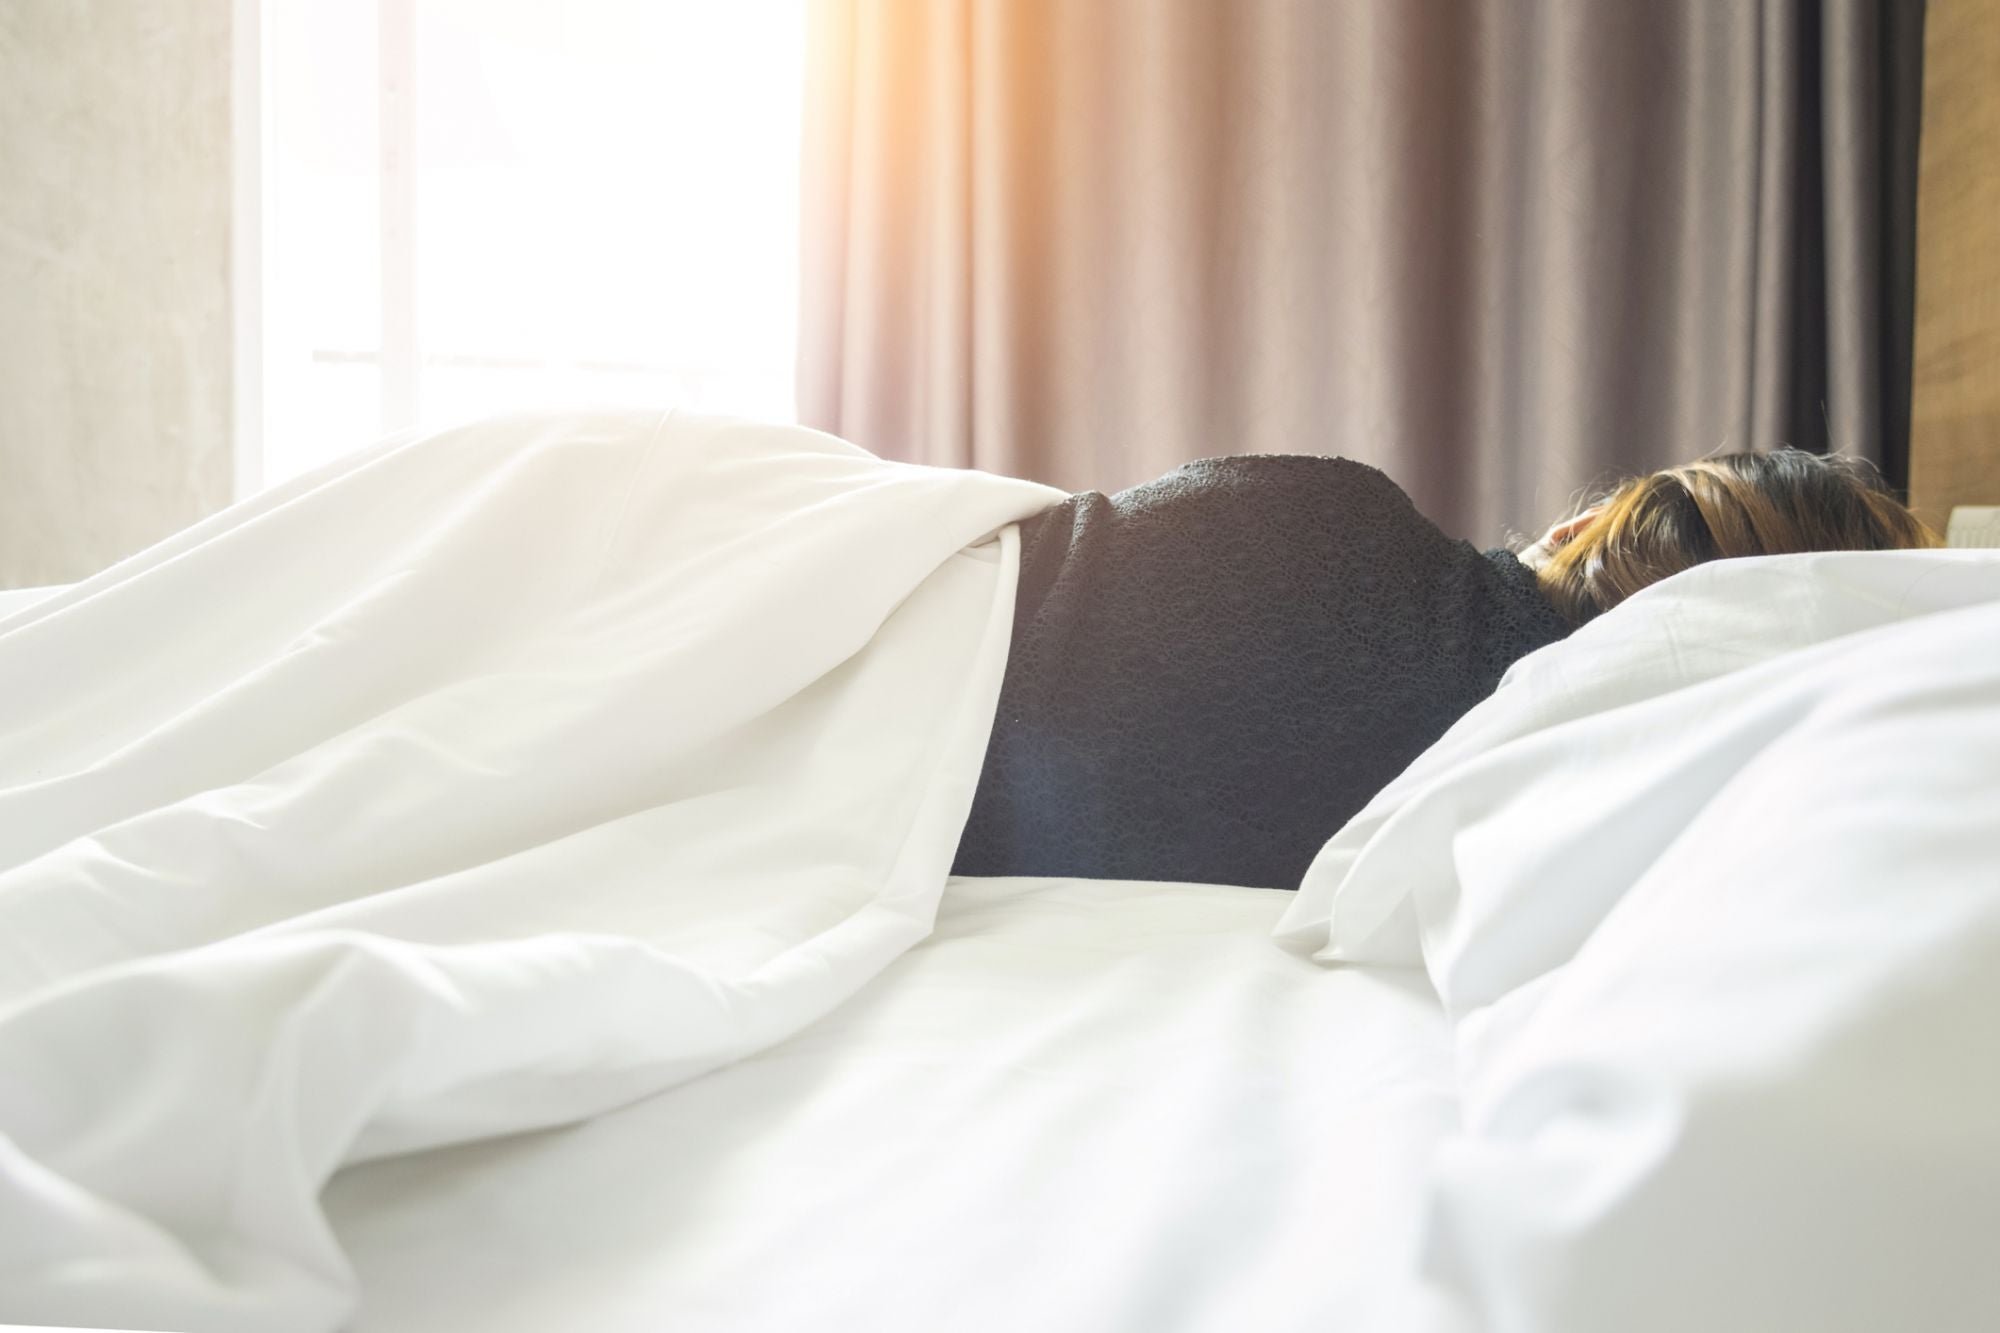 7 Tips to Improve Your Sleep While Business Traveling